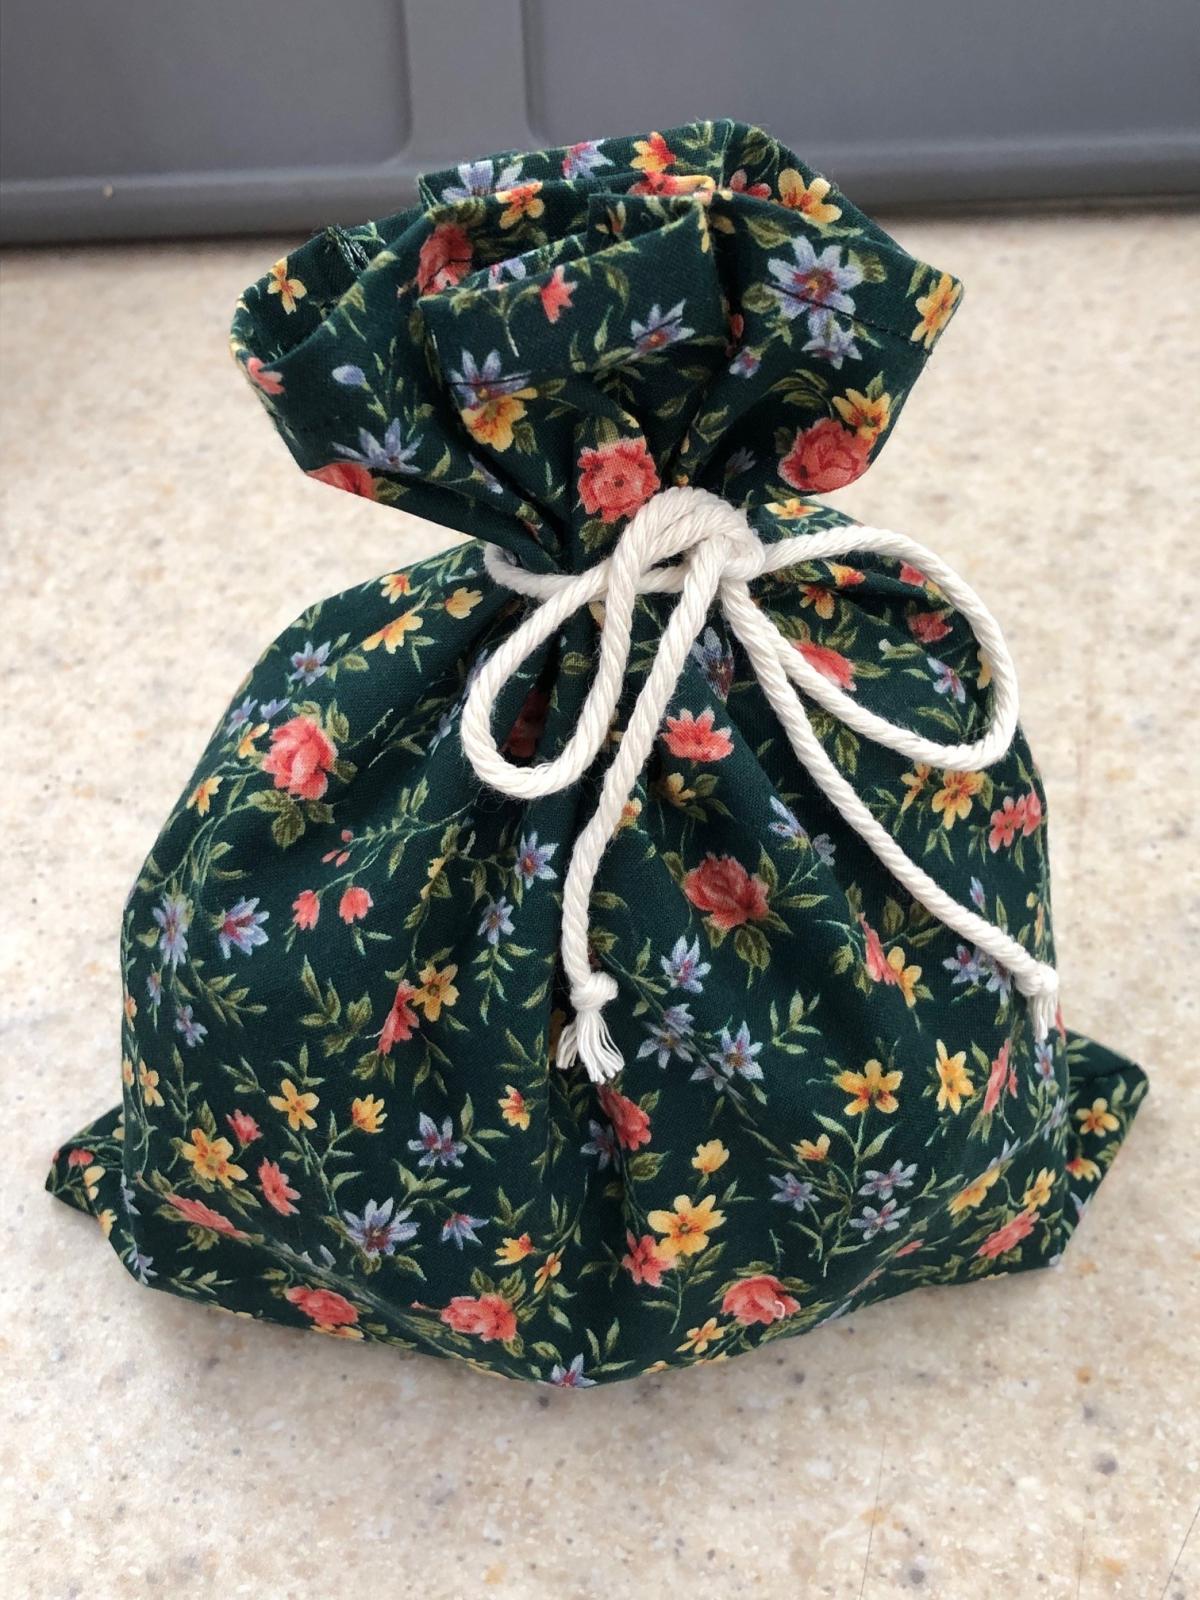 green fabric bag tied with cord